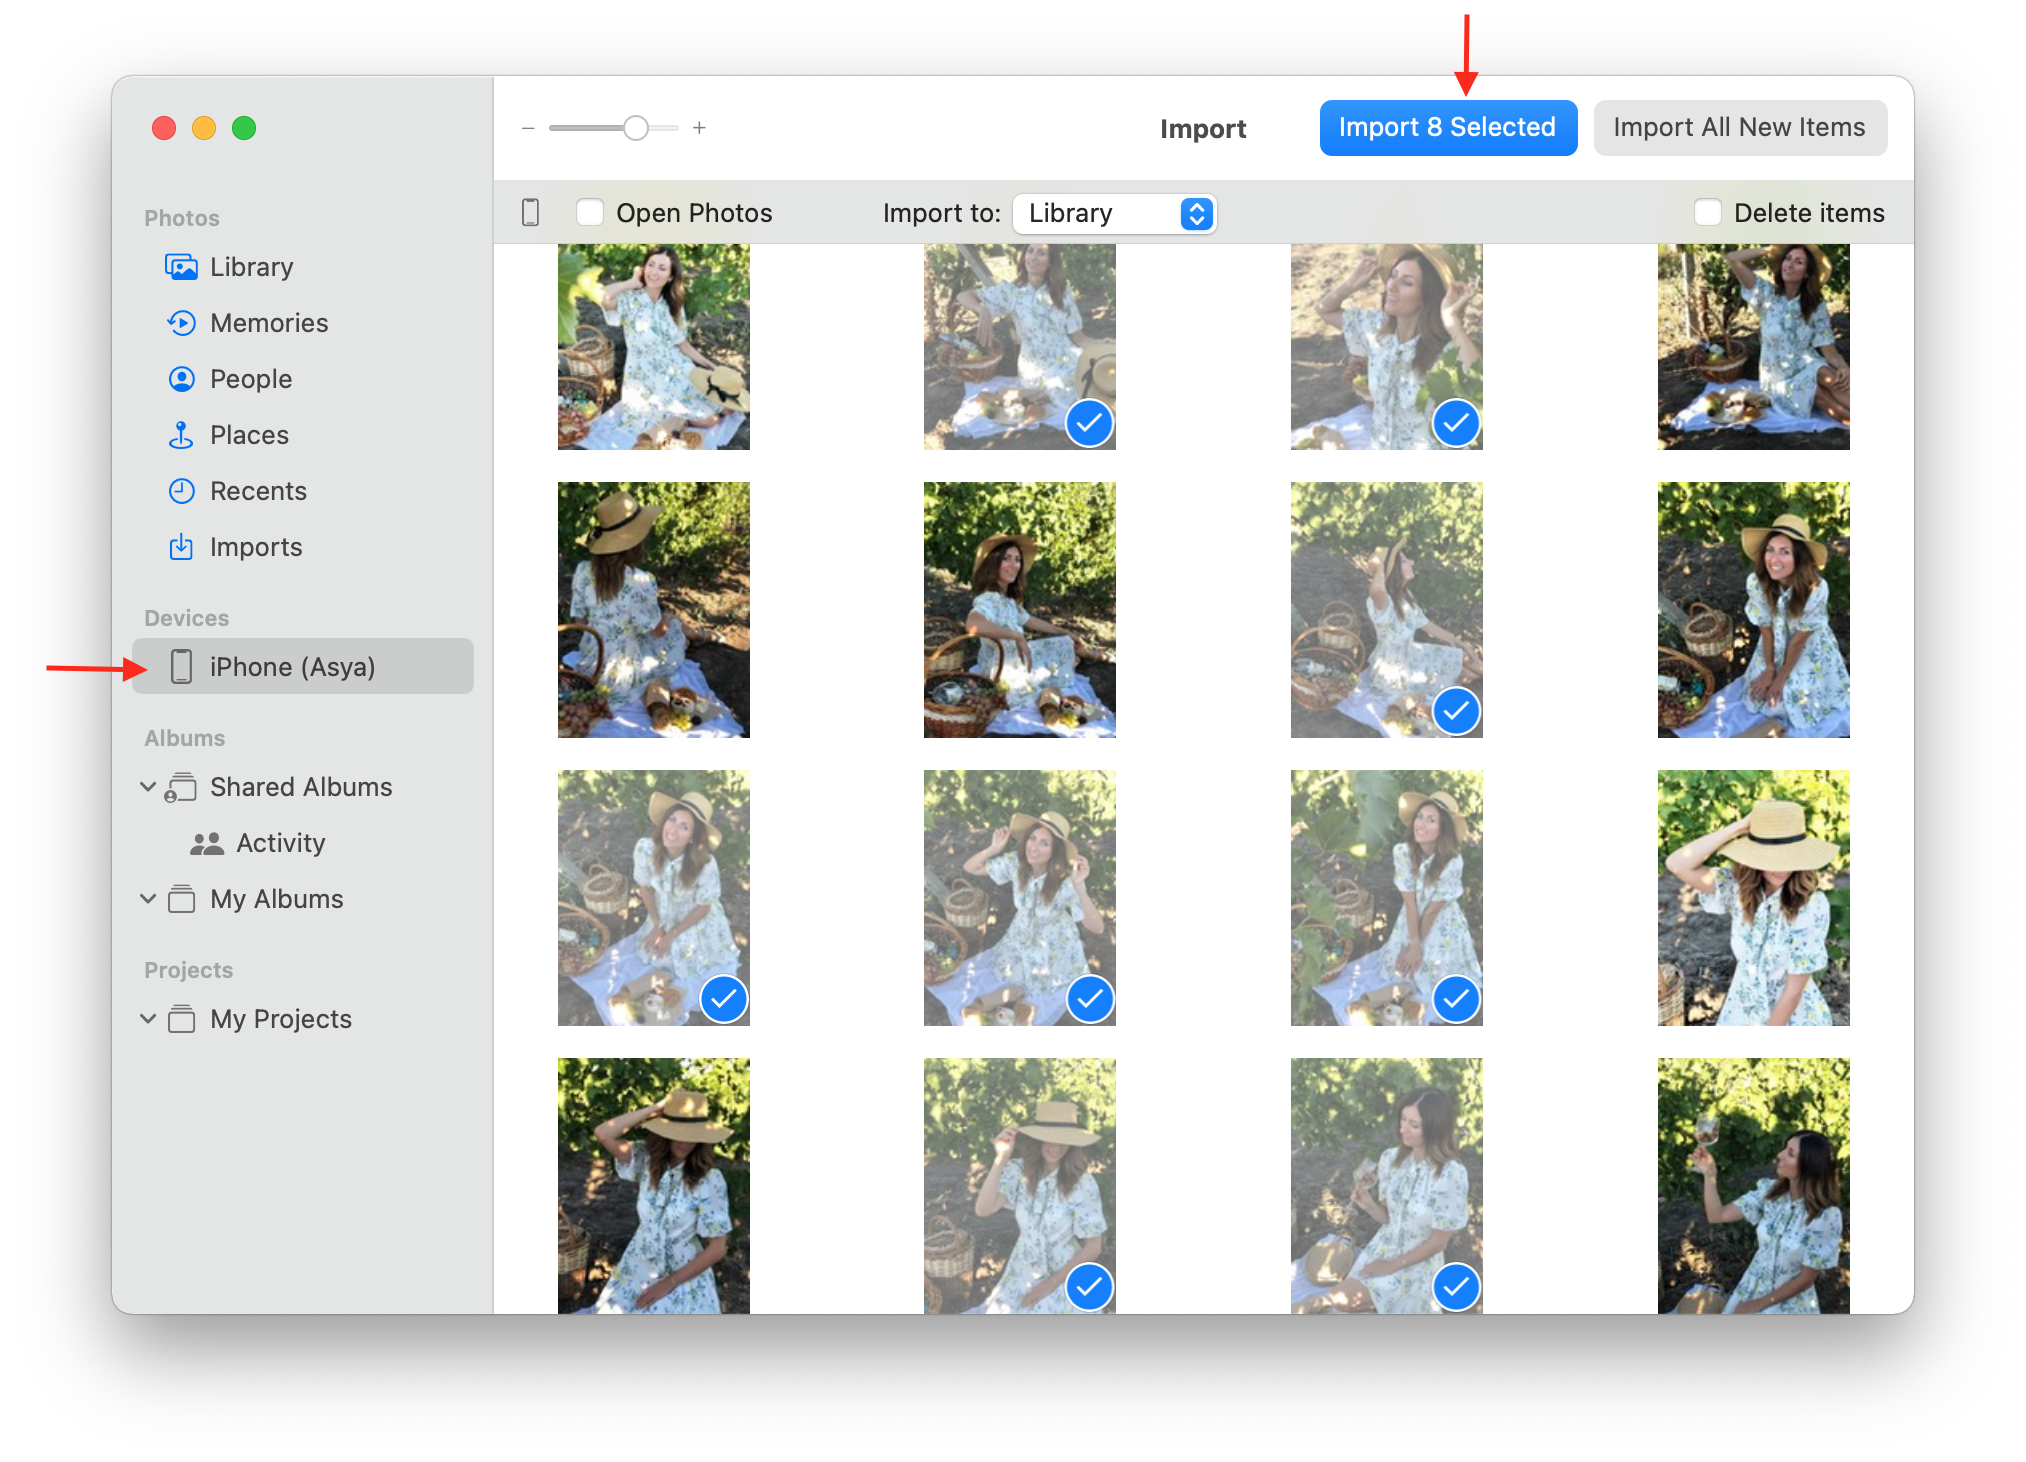 select photos for transfer on mac